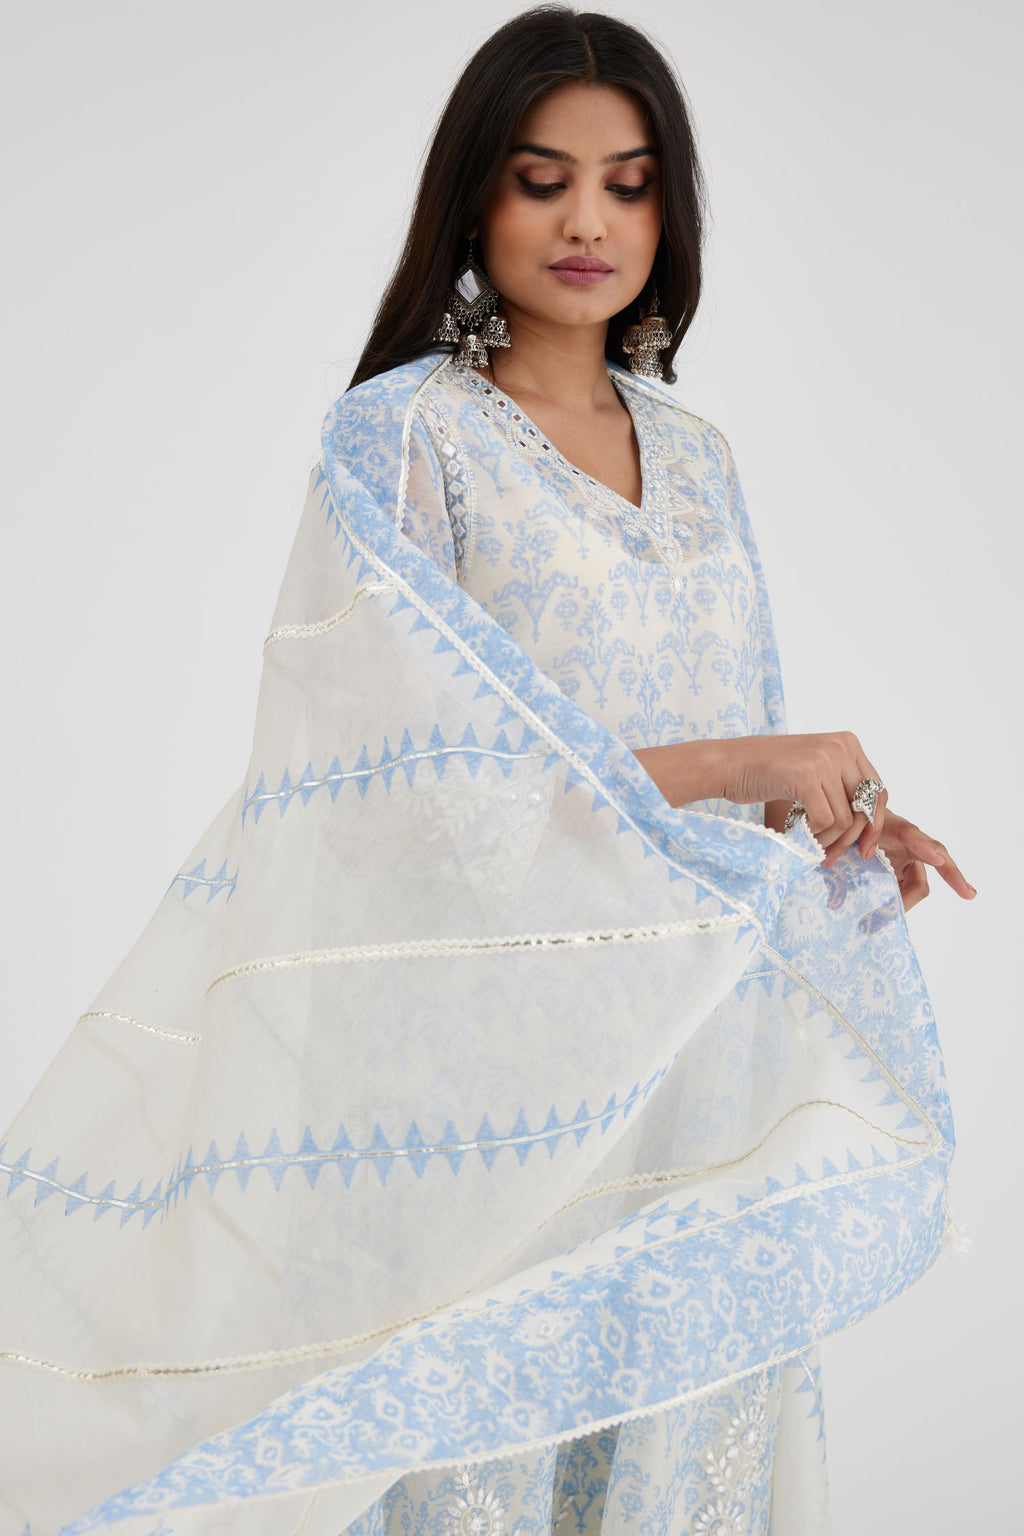 Cotton Chanderi Ikat hand-block printed Dupatta with border and alternating diagonal stripes in print and silver gota.